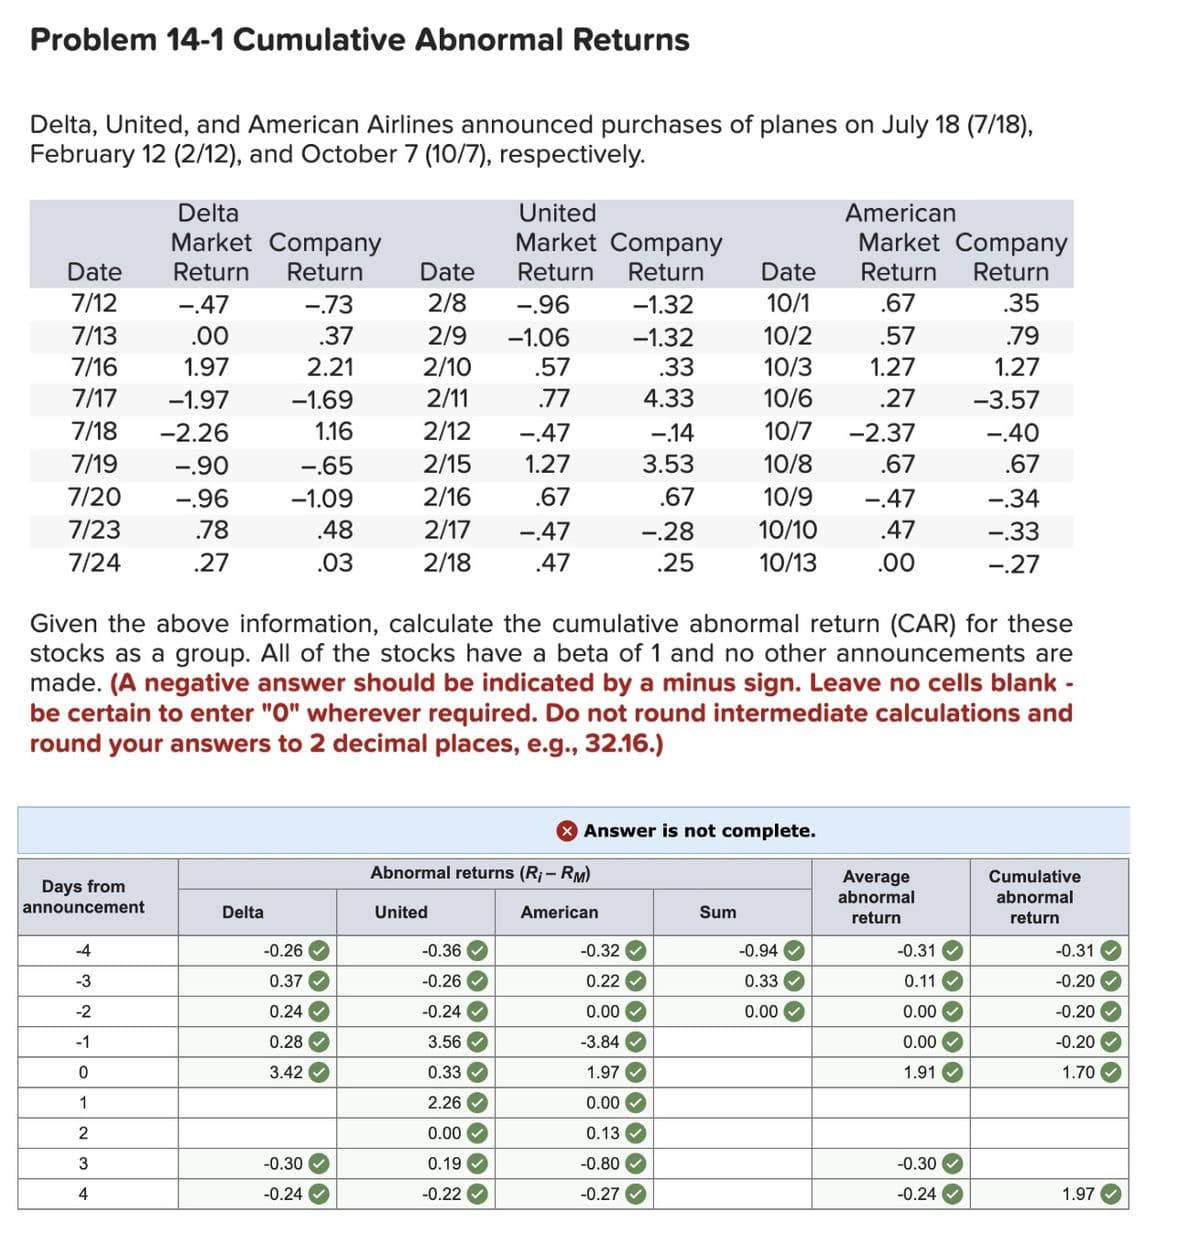 Problem 14-1 Cumulative Abnormal Returns
Delta, United, and American Airlines announced purchases of planes on July 18 (7/18),
February 12 (2/12), and October 7 (10/7), respectively.
Delta
United
American
Market Company
Market Company
Market Company
Date
Return Return
Date
Return Return
Date
Return Return
7/12
-.47
-.73
2/8
-.96
-1.32
10/1
.67
.35
7/13
.00
.37
2/9
-1.06
-1.32
10/2
.57
.79
7/16
1.97
2.21
2/10
.57
.33
10/3
1.27
1.27
7/17 -1.97
-1.69
2/11
.77
4.33
10/6
.27
-3.57
7/18
-2.26
1.16
2/12
-.47
-.14
10/7
-2.37
-.40
7/19
-.90
-.65
2/15
1.27
3.53
10/8
.67
.67
7/20
-.96
-1.09
2/16
.67
.67
10/9
-.47
-.34
7/23
.78
.48
2/17
-.47
-.28
10/10
.47
-.33
7/24
.27
.03
2/18
.47
.25
10/13
.00
-.27
-
Given the above information, calculate the cumulative abnormal return (CAR) for these
stocks as a group. All of the stocks have a beta of 1 and no other announcements are
made. (A negative answer should be indicated by a minus sign. Leave no cells blank
be certain to enter "O" wherever required. Do not round intermediate calculations and
round your answers to 2 decimal places, e.g., 32.16.)
Answer is not complete.
Abnormal returns (R; - RM)
Average
Cumulative
Days from
announcement
Delta
United
American
Sum
abnormal
return
abnormal
return
-4
-0.26
-0.36
-0.32
-0.94
-0.31✓
-0.31
-3
0.37
-0.26
0.22
0.33
0.11
-0.20✓
-2
0.24
-0.24
0.00
0.00
0.00
-0.20✓
-1
0.28
3.56
-3.84
0.00
-0.20✓
0
3.42
0.33
1.97
1.91
1.70✓
1
2.26
0.00
2
0.00
0.13
3
-0.30
0.19
-0.80
-0.30
4
-0.24
-0.22
-0.27
-0.24
1.97